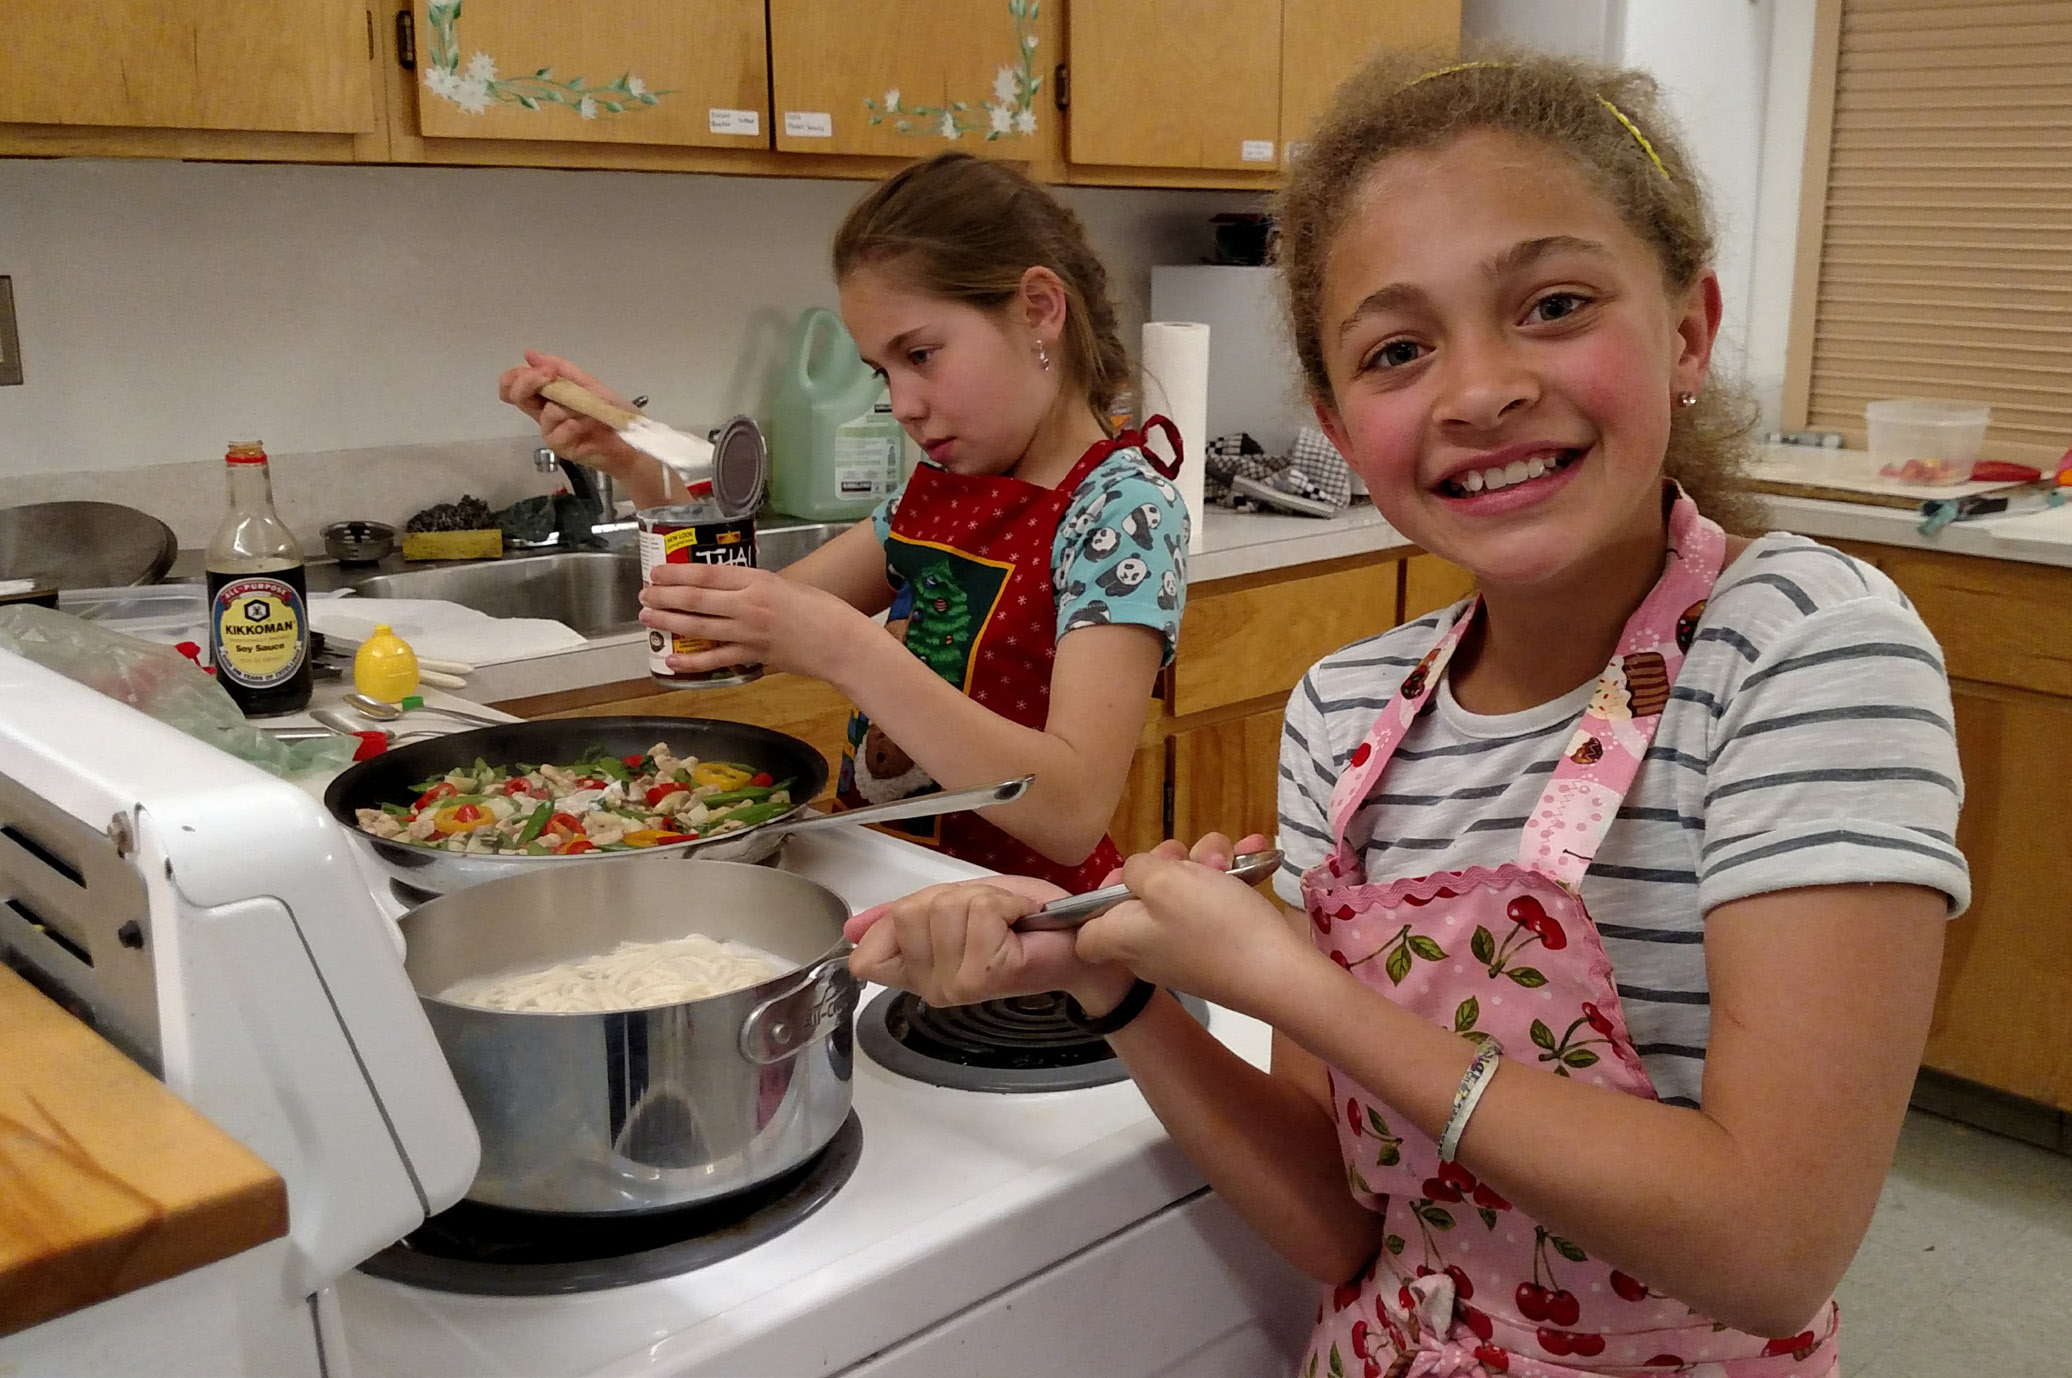 Two kids are cooking in a kitchen